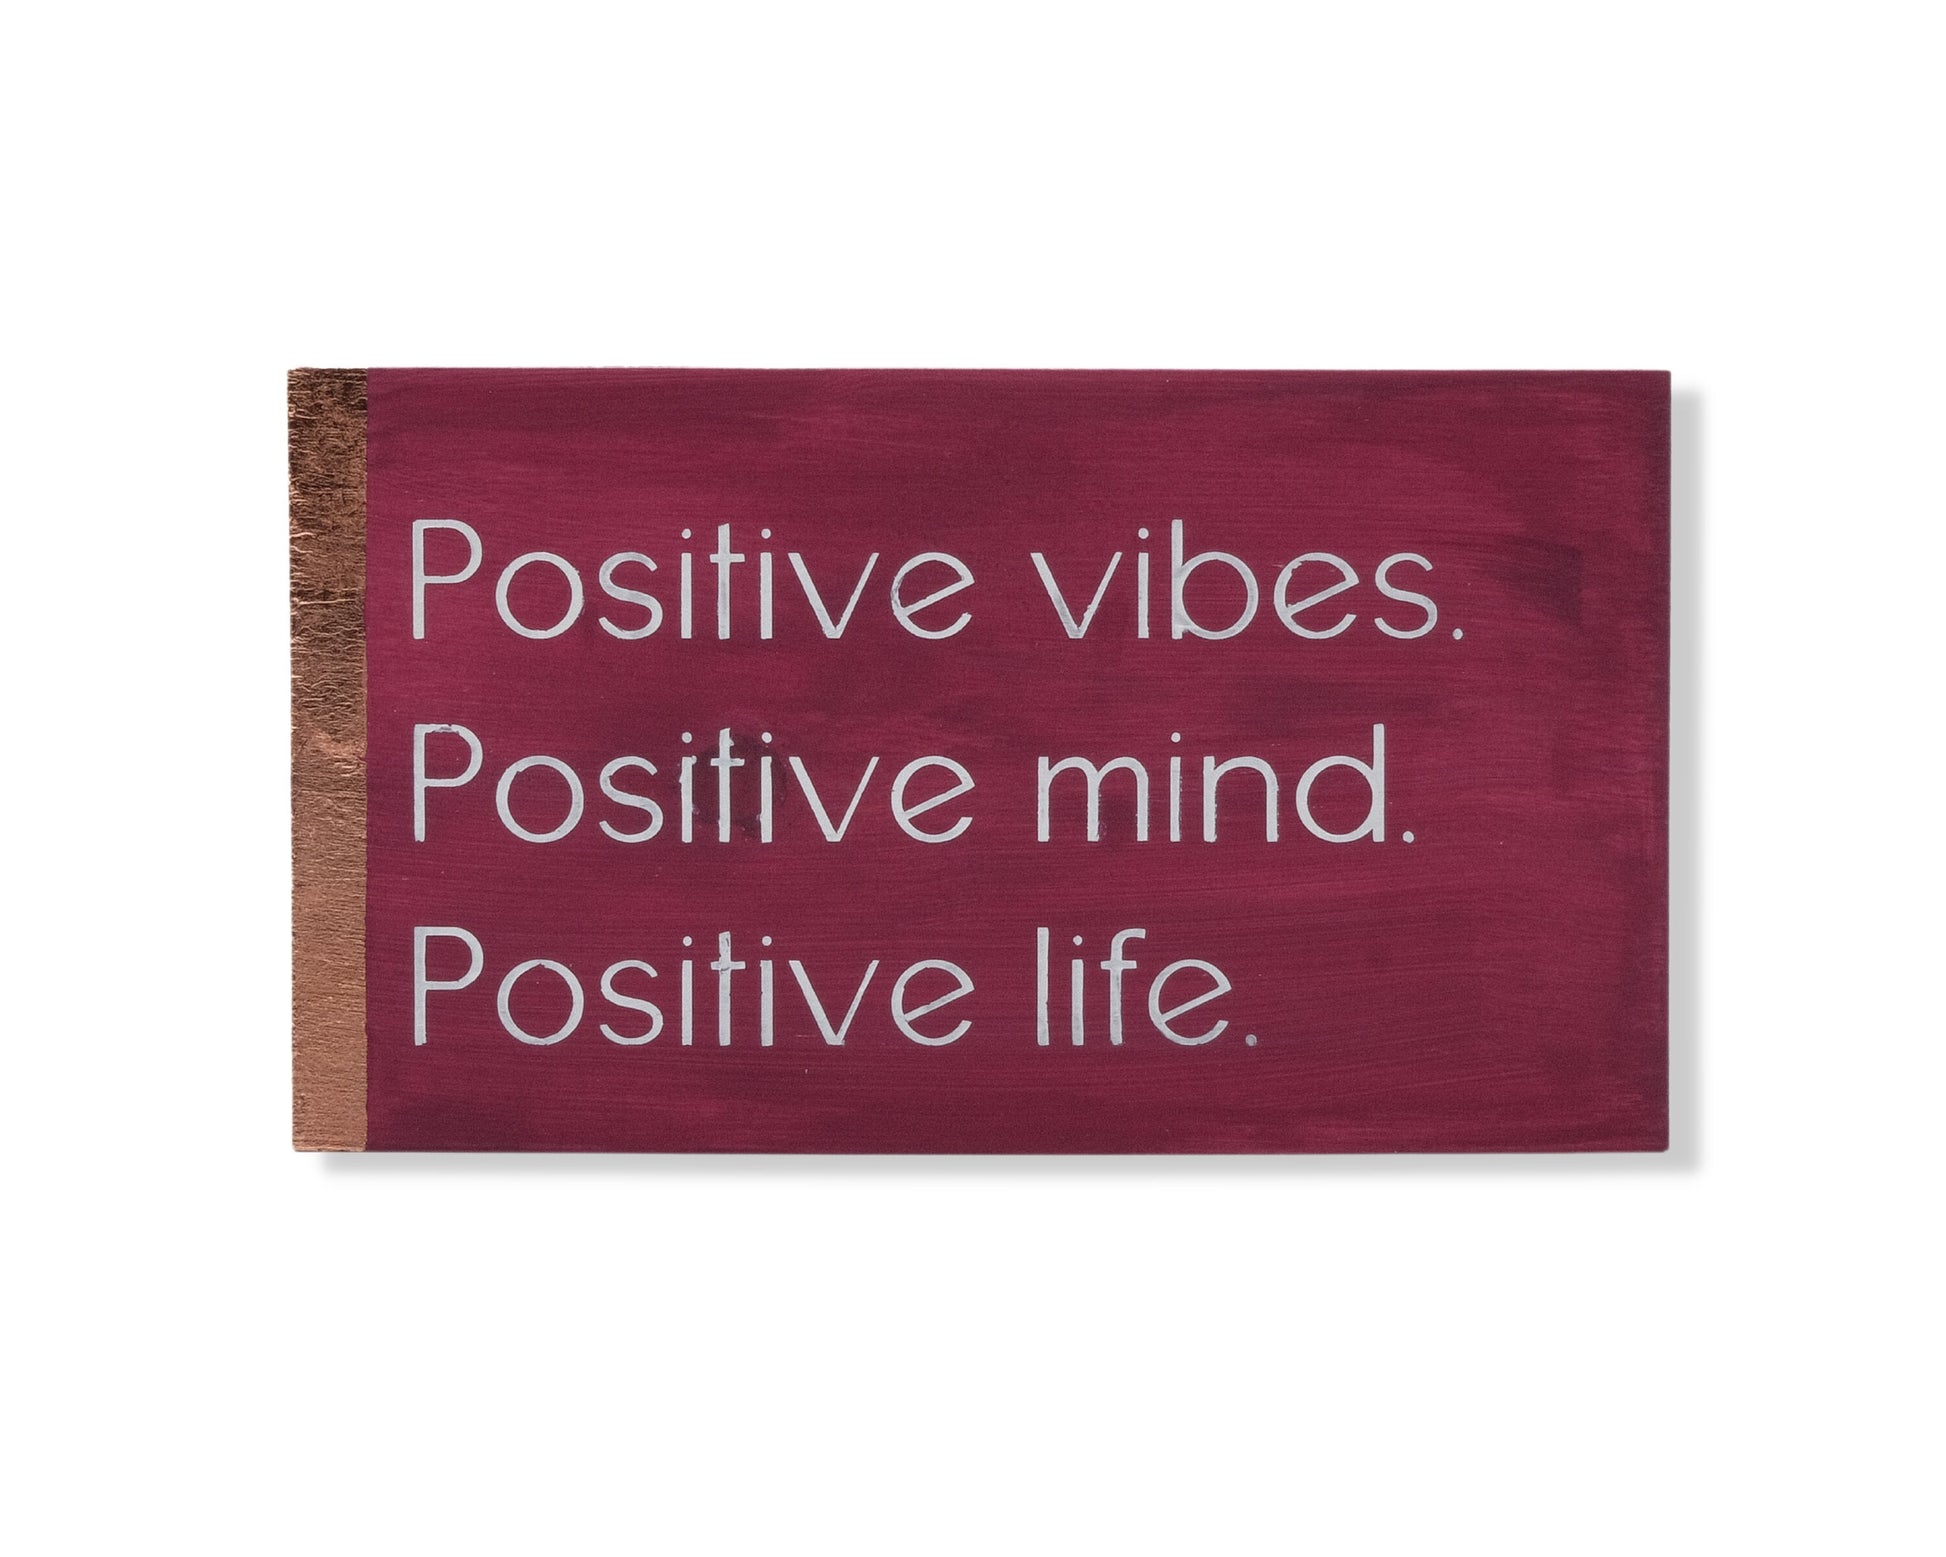 Positive Vibes, Positive Mind, Positive Life, custom wood block sign, inspirational quote, self care home decor, gift for her, gift for him